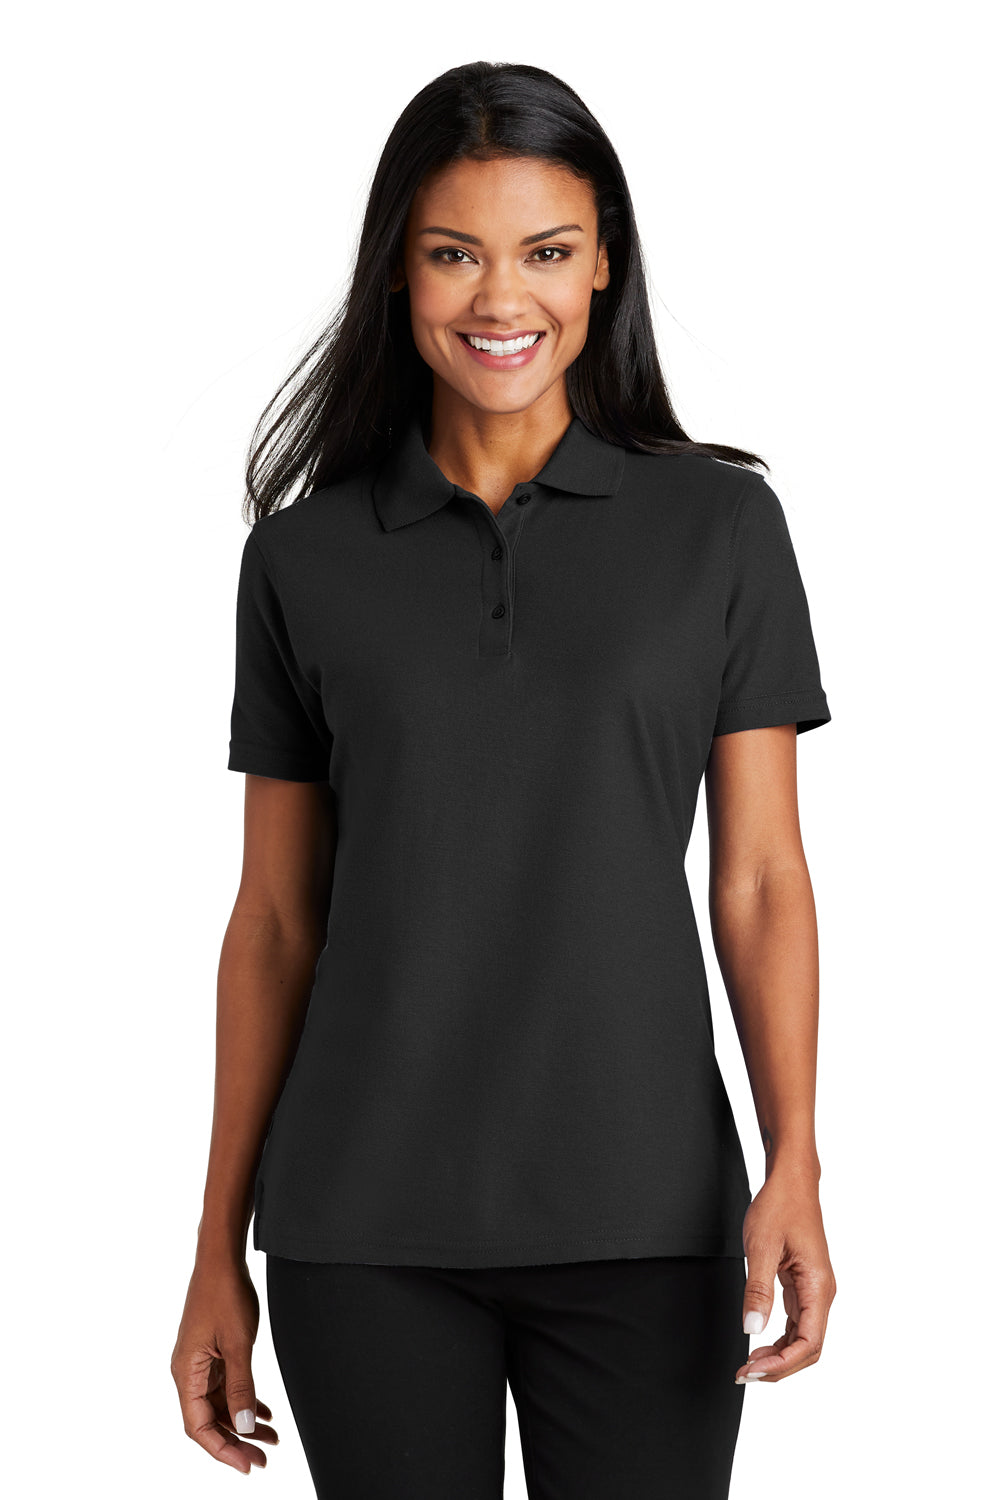 Port Authority L510 Womens Moisture Wicking Short Sleeve Polo Shirt Black Front